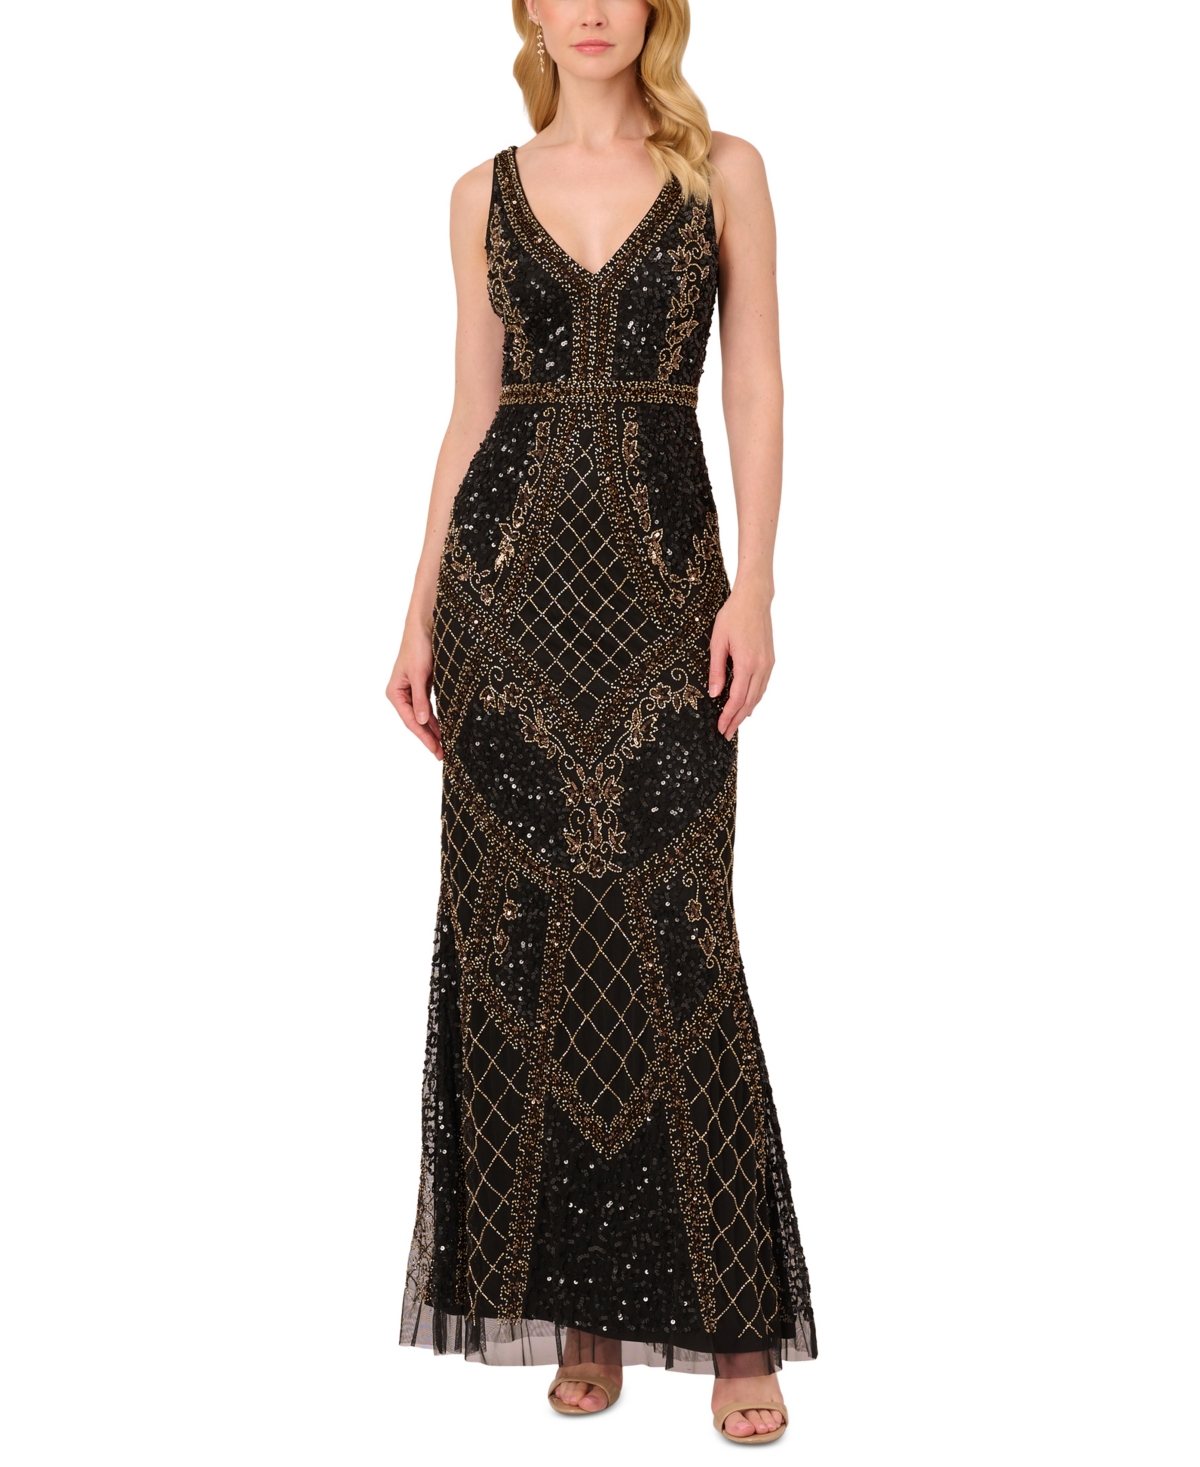 1920s Fashion & Clothing | Roaring 20s Attire Adrianna Papell Womens Beaded Mesh Column Gown - Black Gold $349.00 AT vintagedancer.com